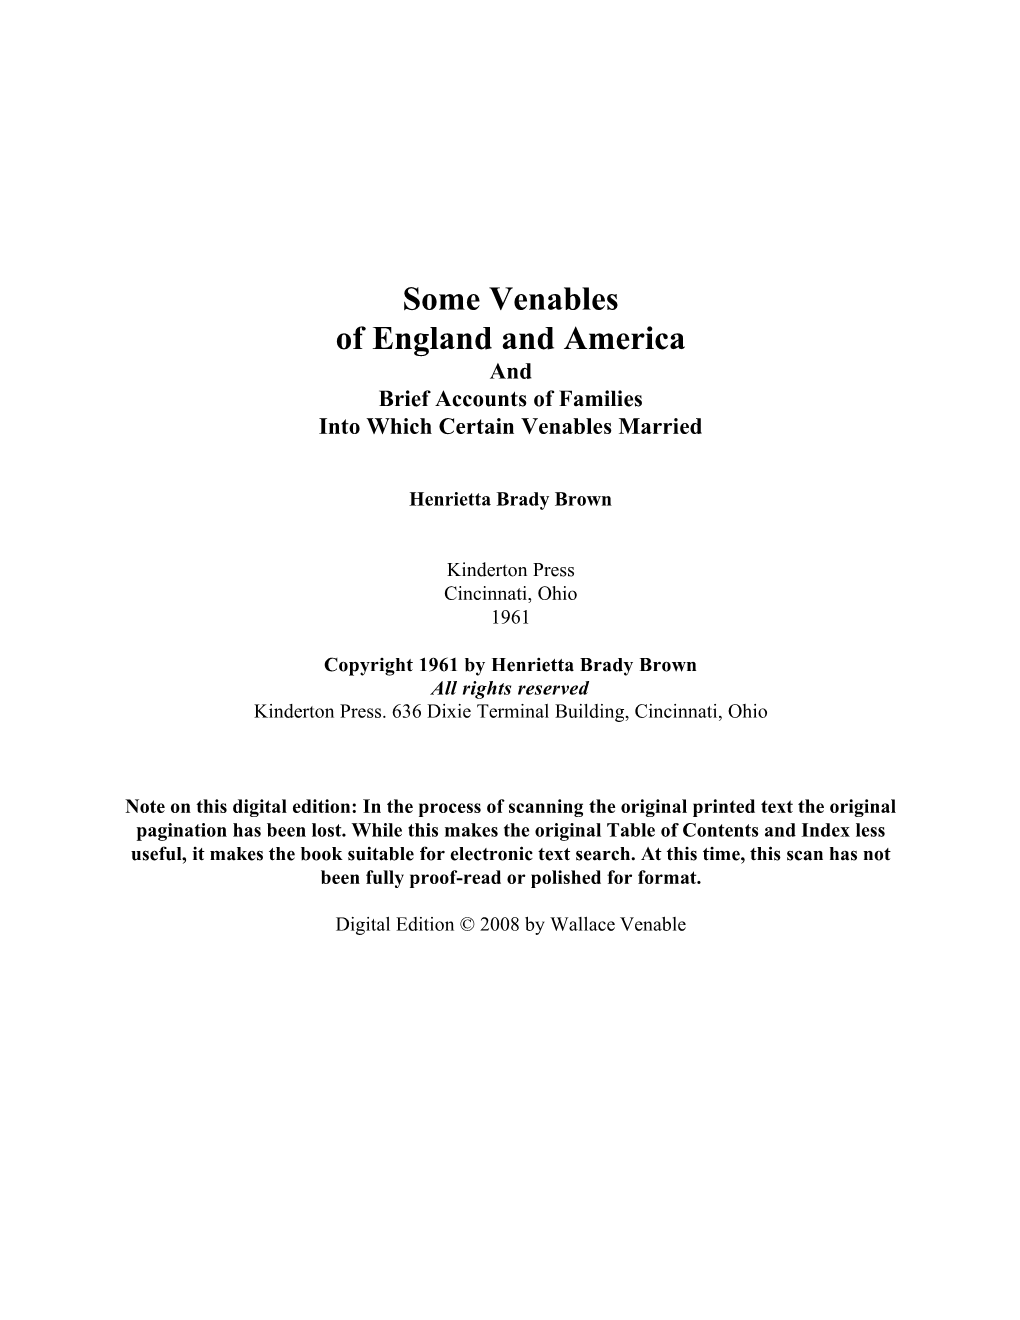 Some Venables of England and America and Brief Accounts of Families Into Which Certain Venables Married